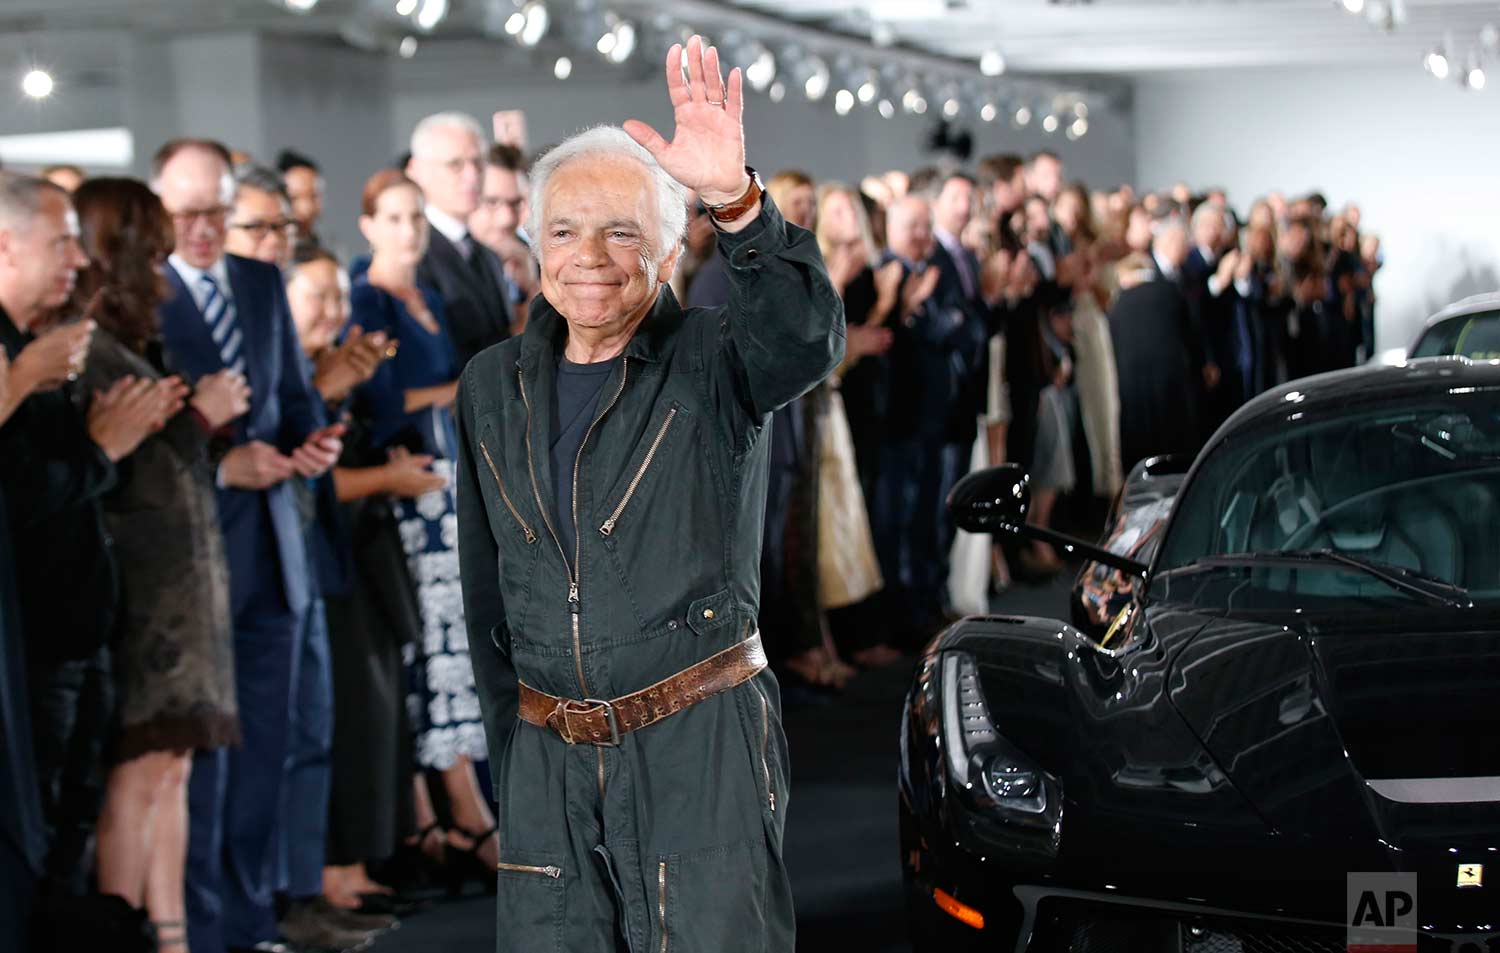  Ralph Lauren waves beside one car from his collection in The Garage at the conclusion of the Ralph Lauren fashion show during Fashion Week, Tuesday, Sept. 12, 2017, in Bedford, NY. (AP Photo/Kathy Willens) 